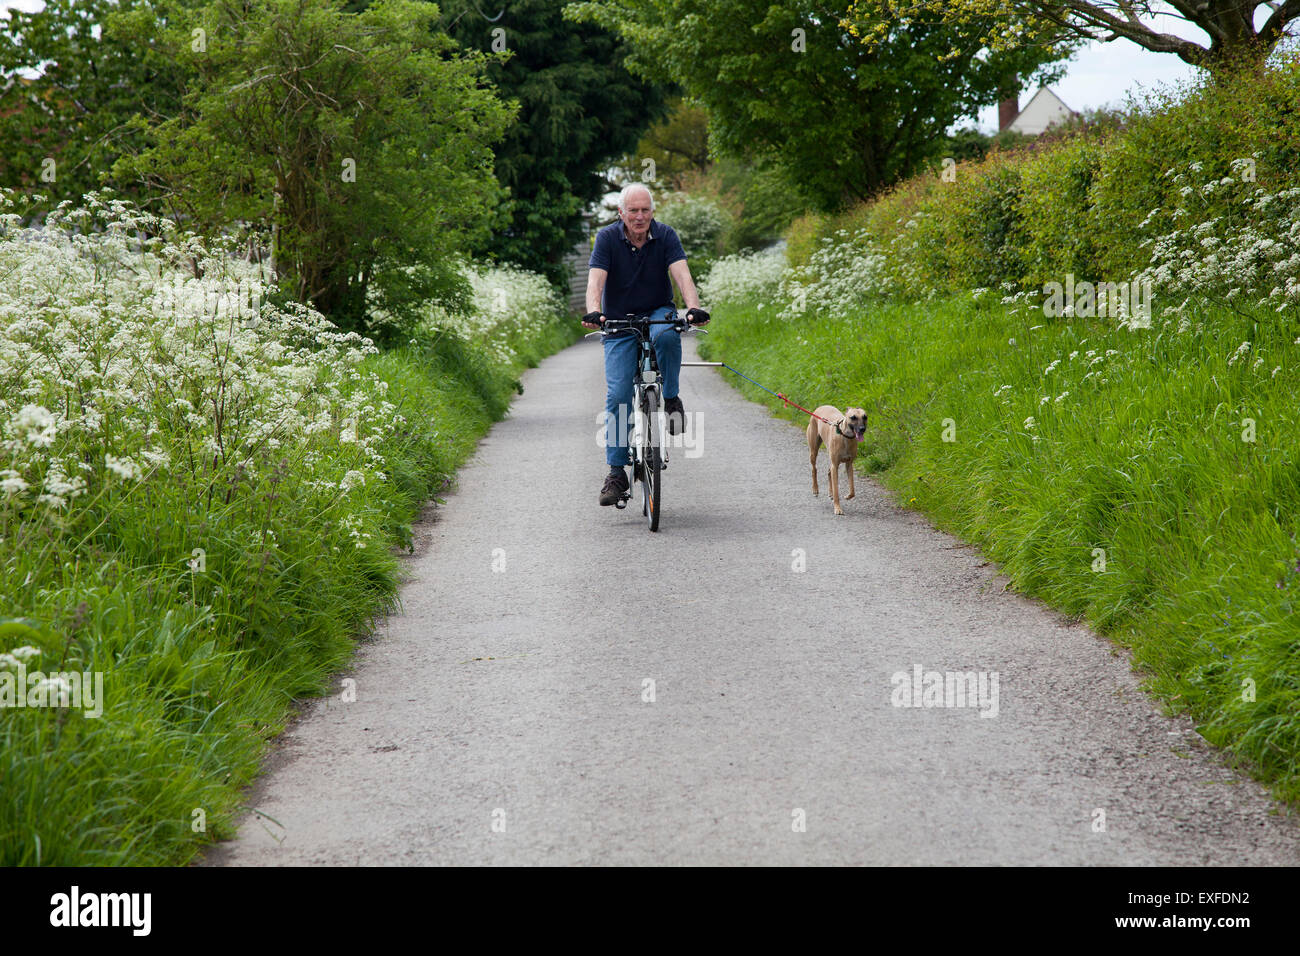 Senior man riding bike on country road with dog Banque D'Images